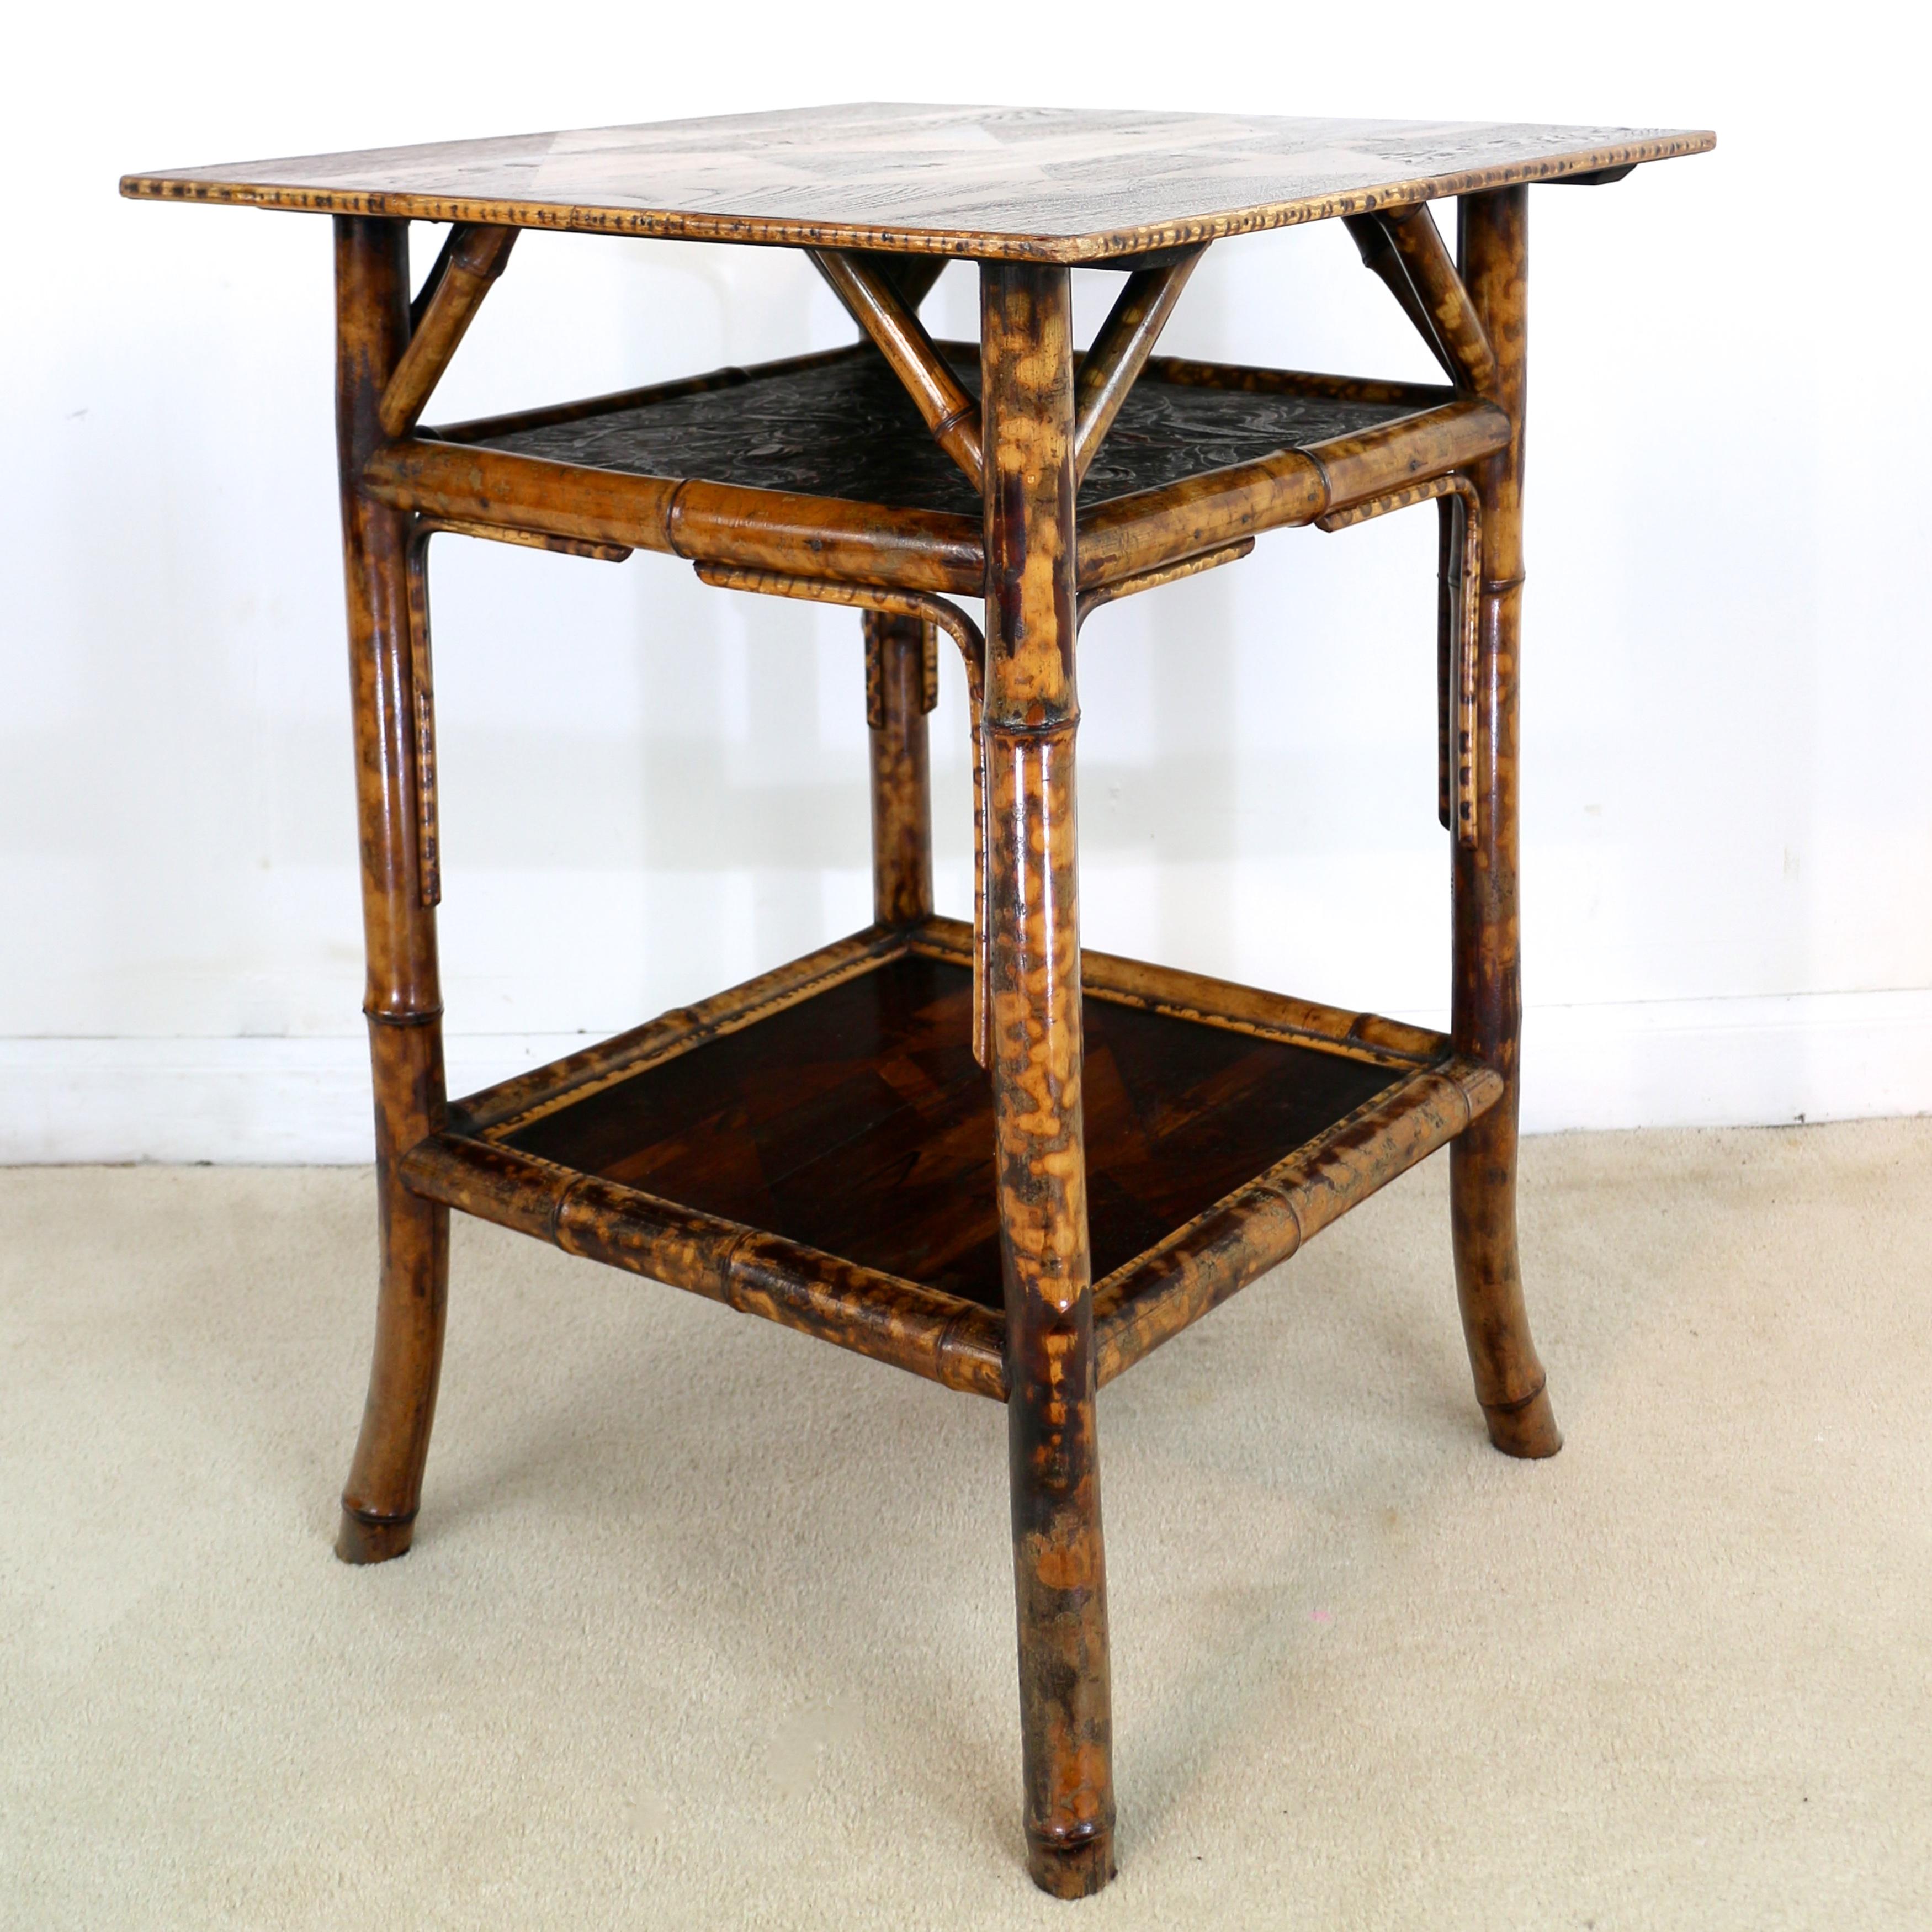 Aesthetic Movement Antique English Victorian Tortoiseshell Bambo Japanese Parquetry Table